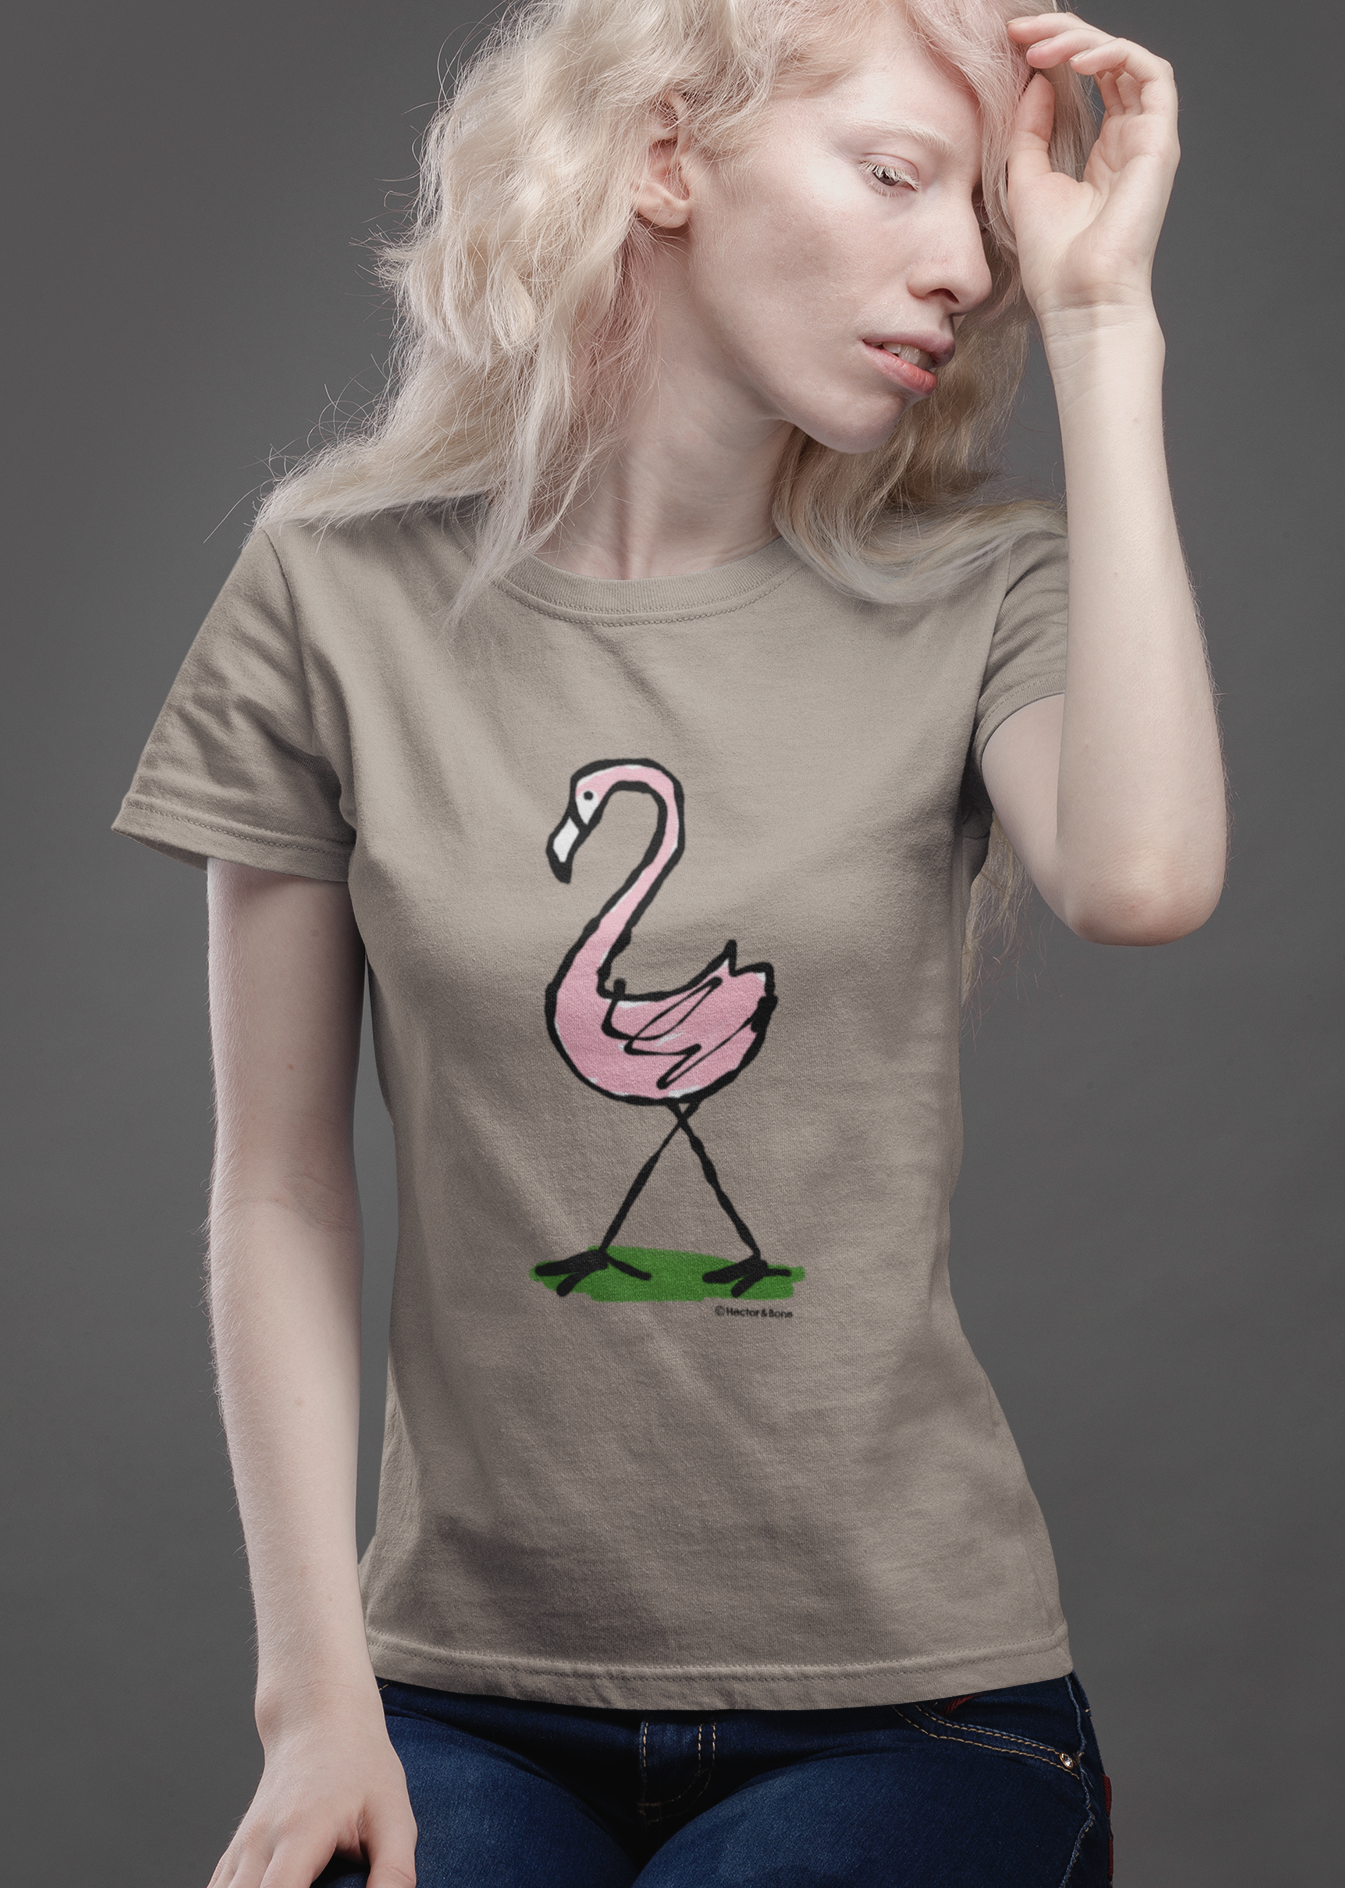 Pink Flamingo T-shirt - Young woman wearing an illustrated flamingo t-shirt design on sand tee by Hector and Bone